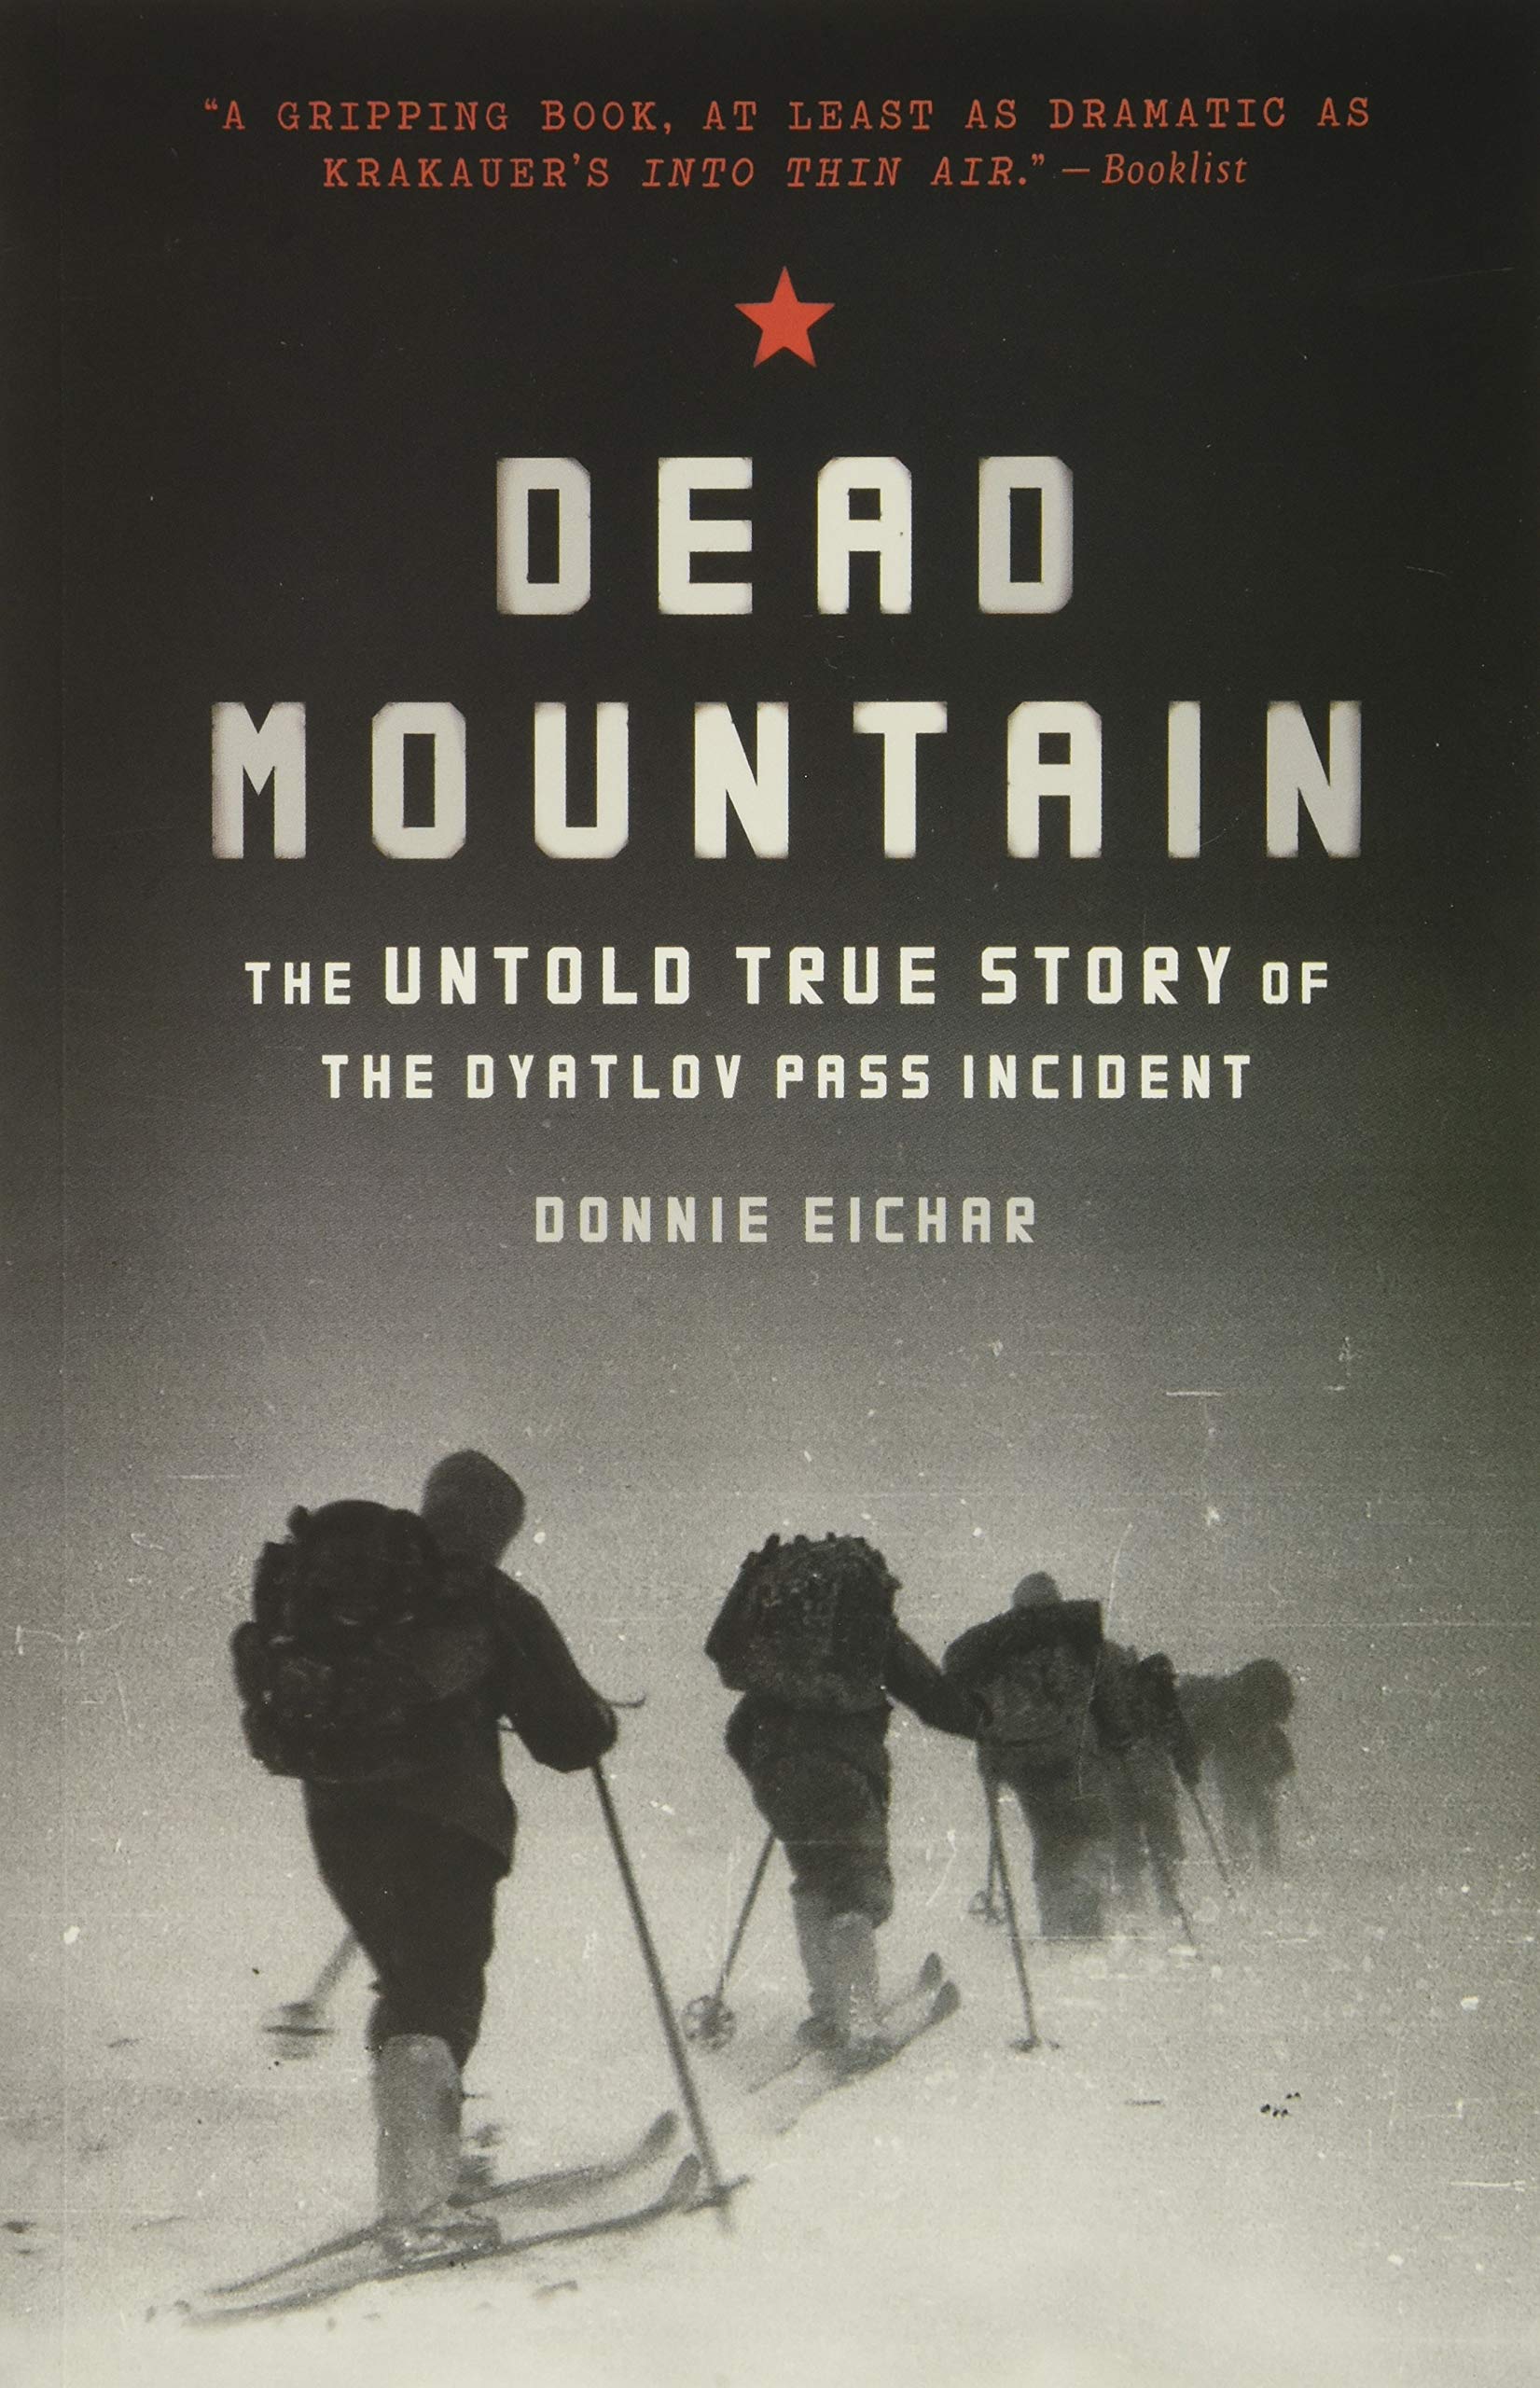 Dead Mountain: The Untold True Story of the Dyatlov Pass Incident (Historical Nonfiction Bestseller, True Story Book of Survival)